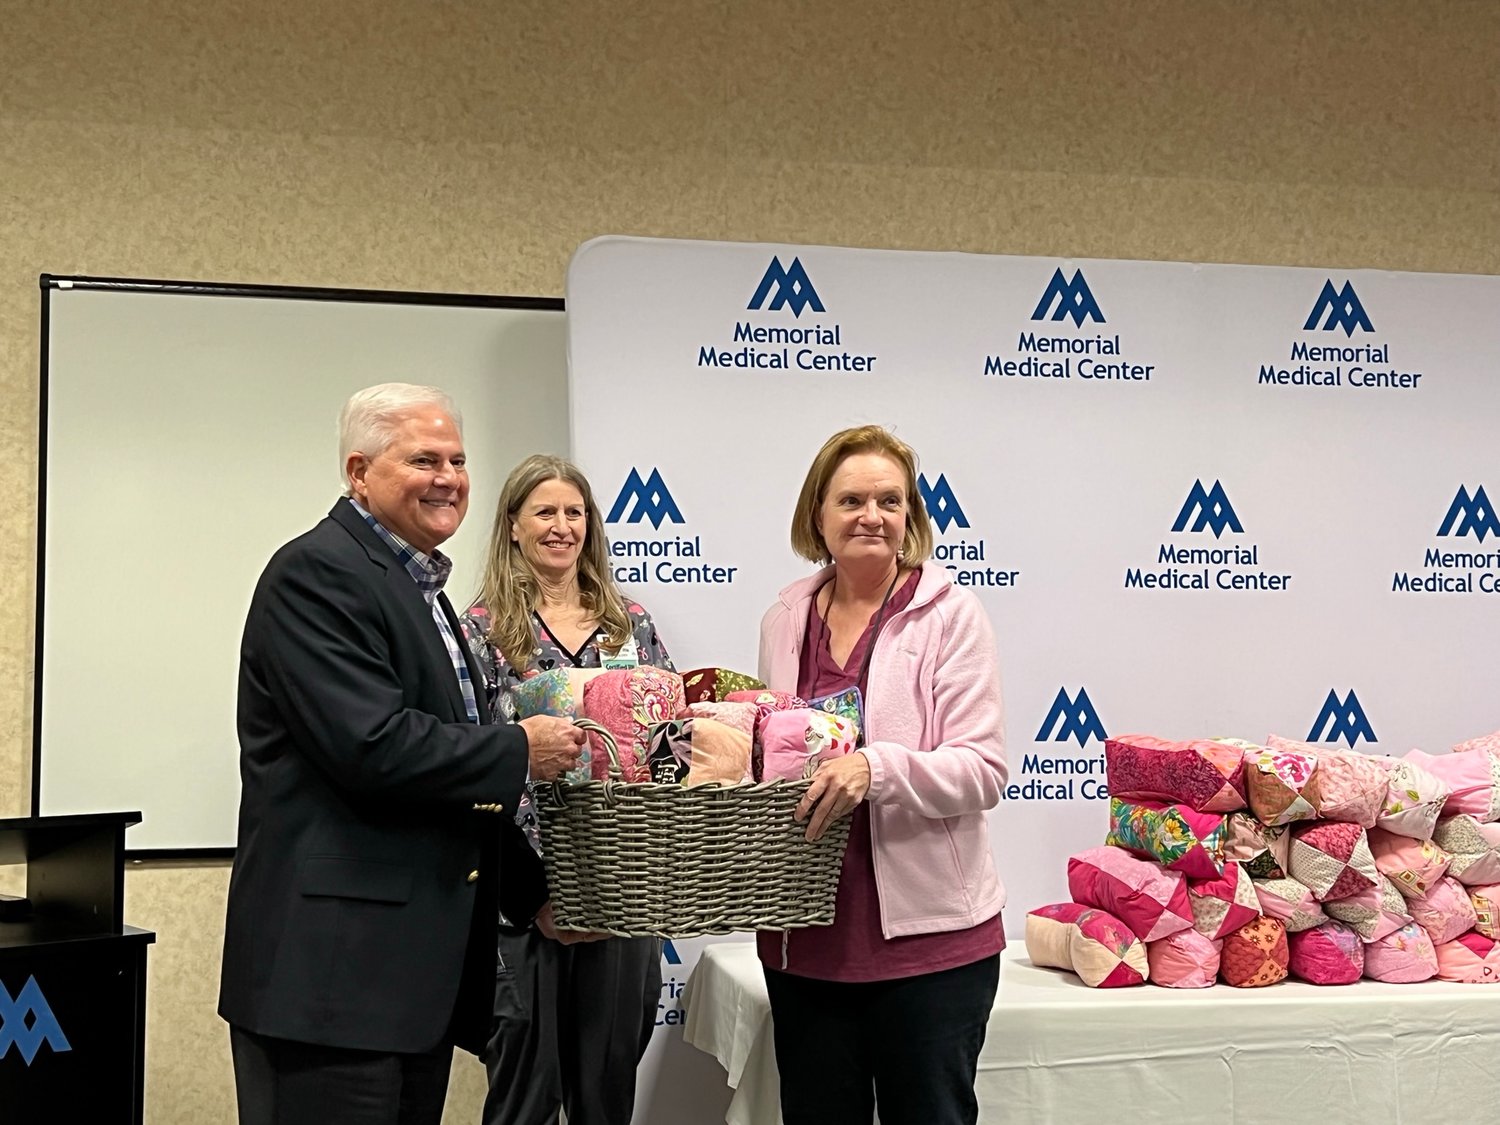 Memorial Medical Center CEO John Harris and Cancer Center Manager Lynn Fletcher accept a gift of 217 hand-made pillows for cancer patients from Las Colcheras Quilt Guild co-president and breast cancer survivor Dianne Herrmann during an Oct. 28 presentation.